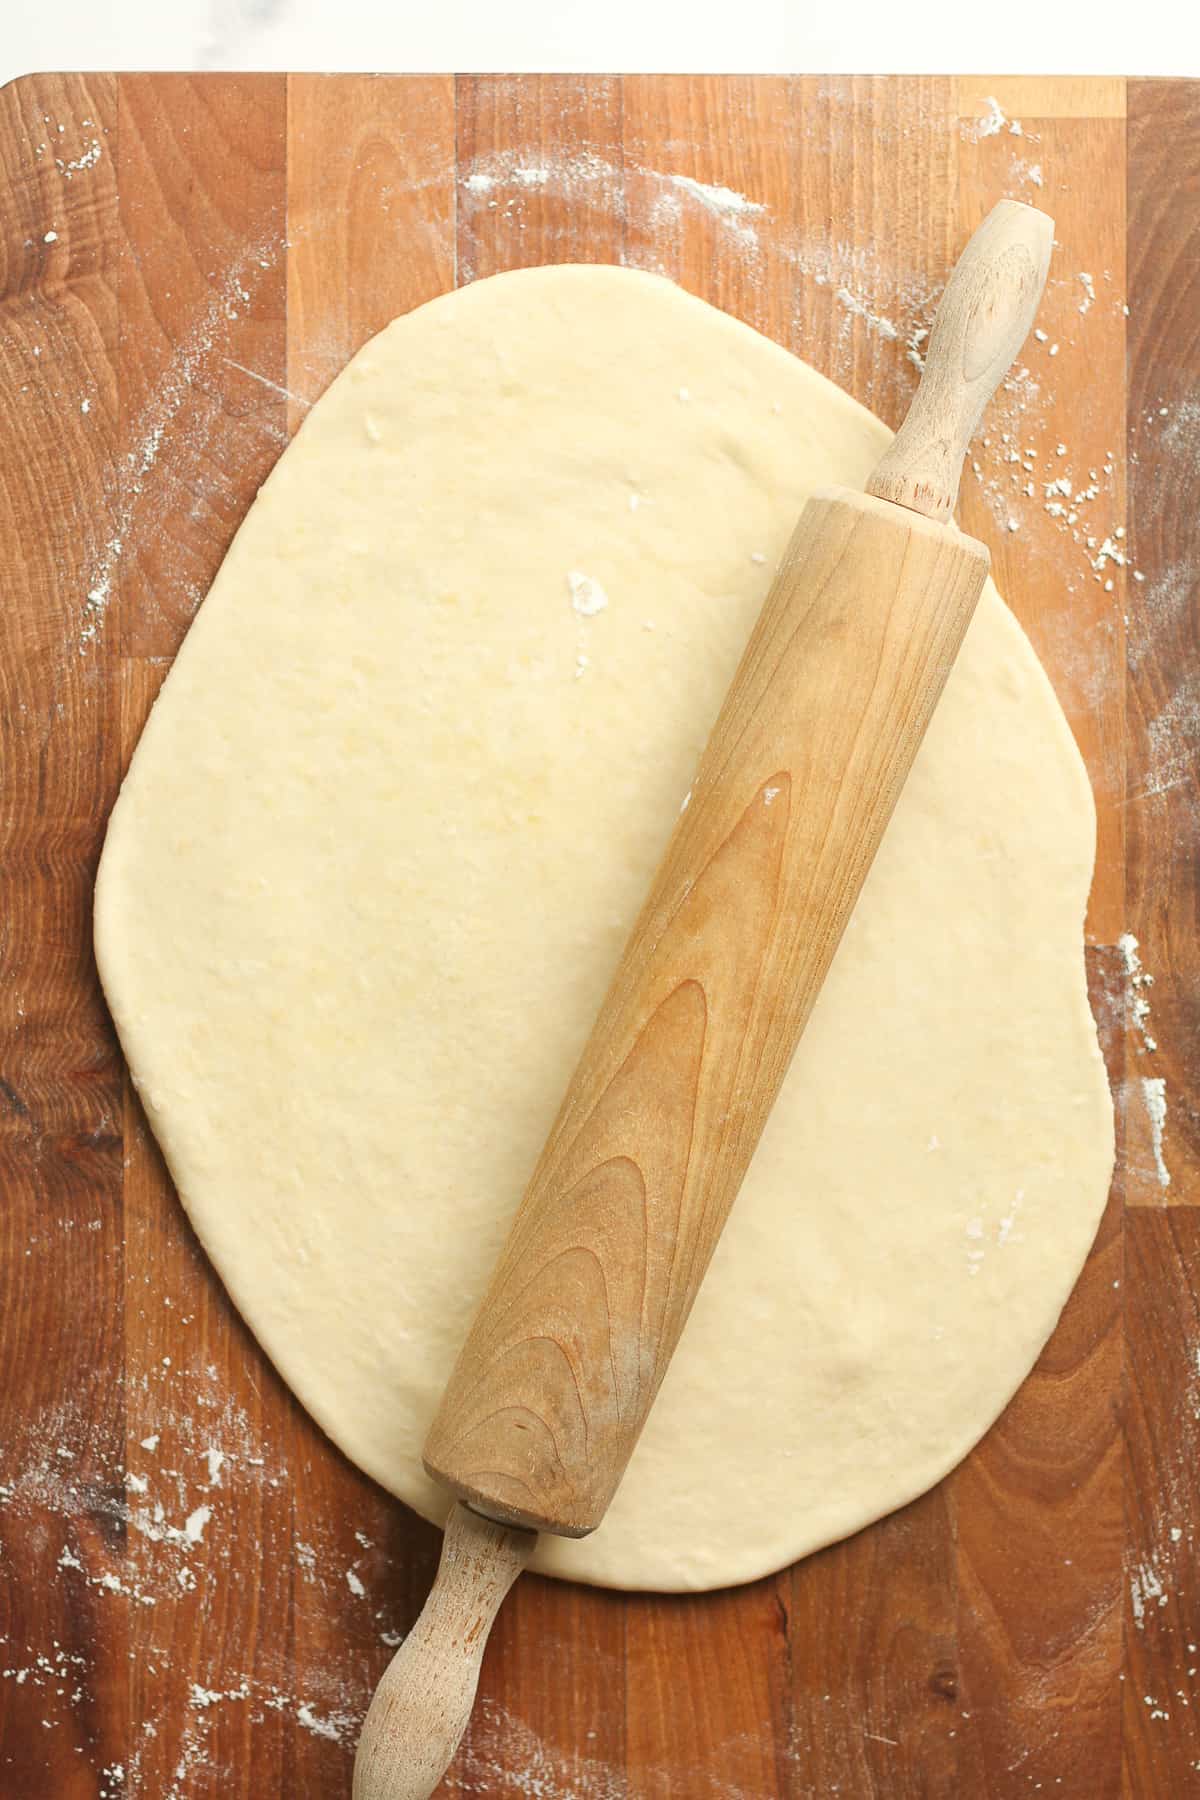 The just rolled out flatbread with a rolling pin.